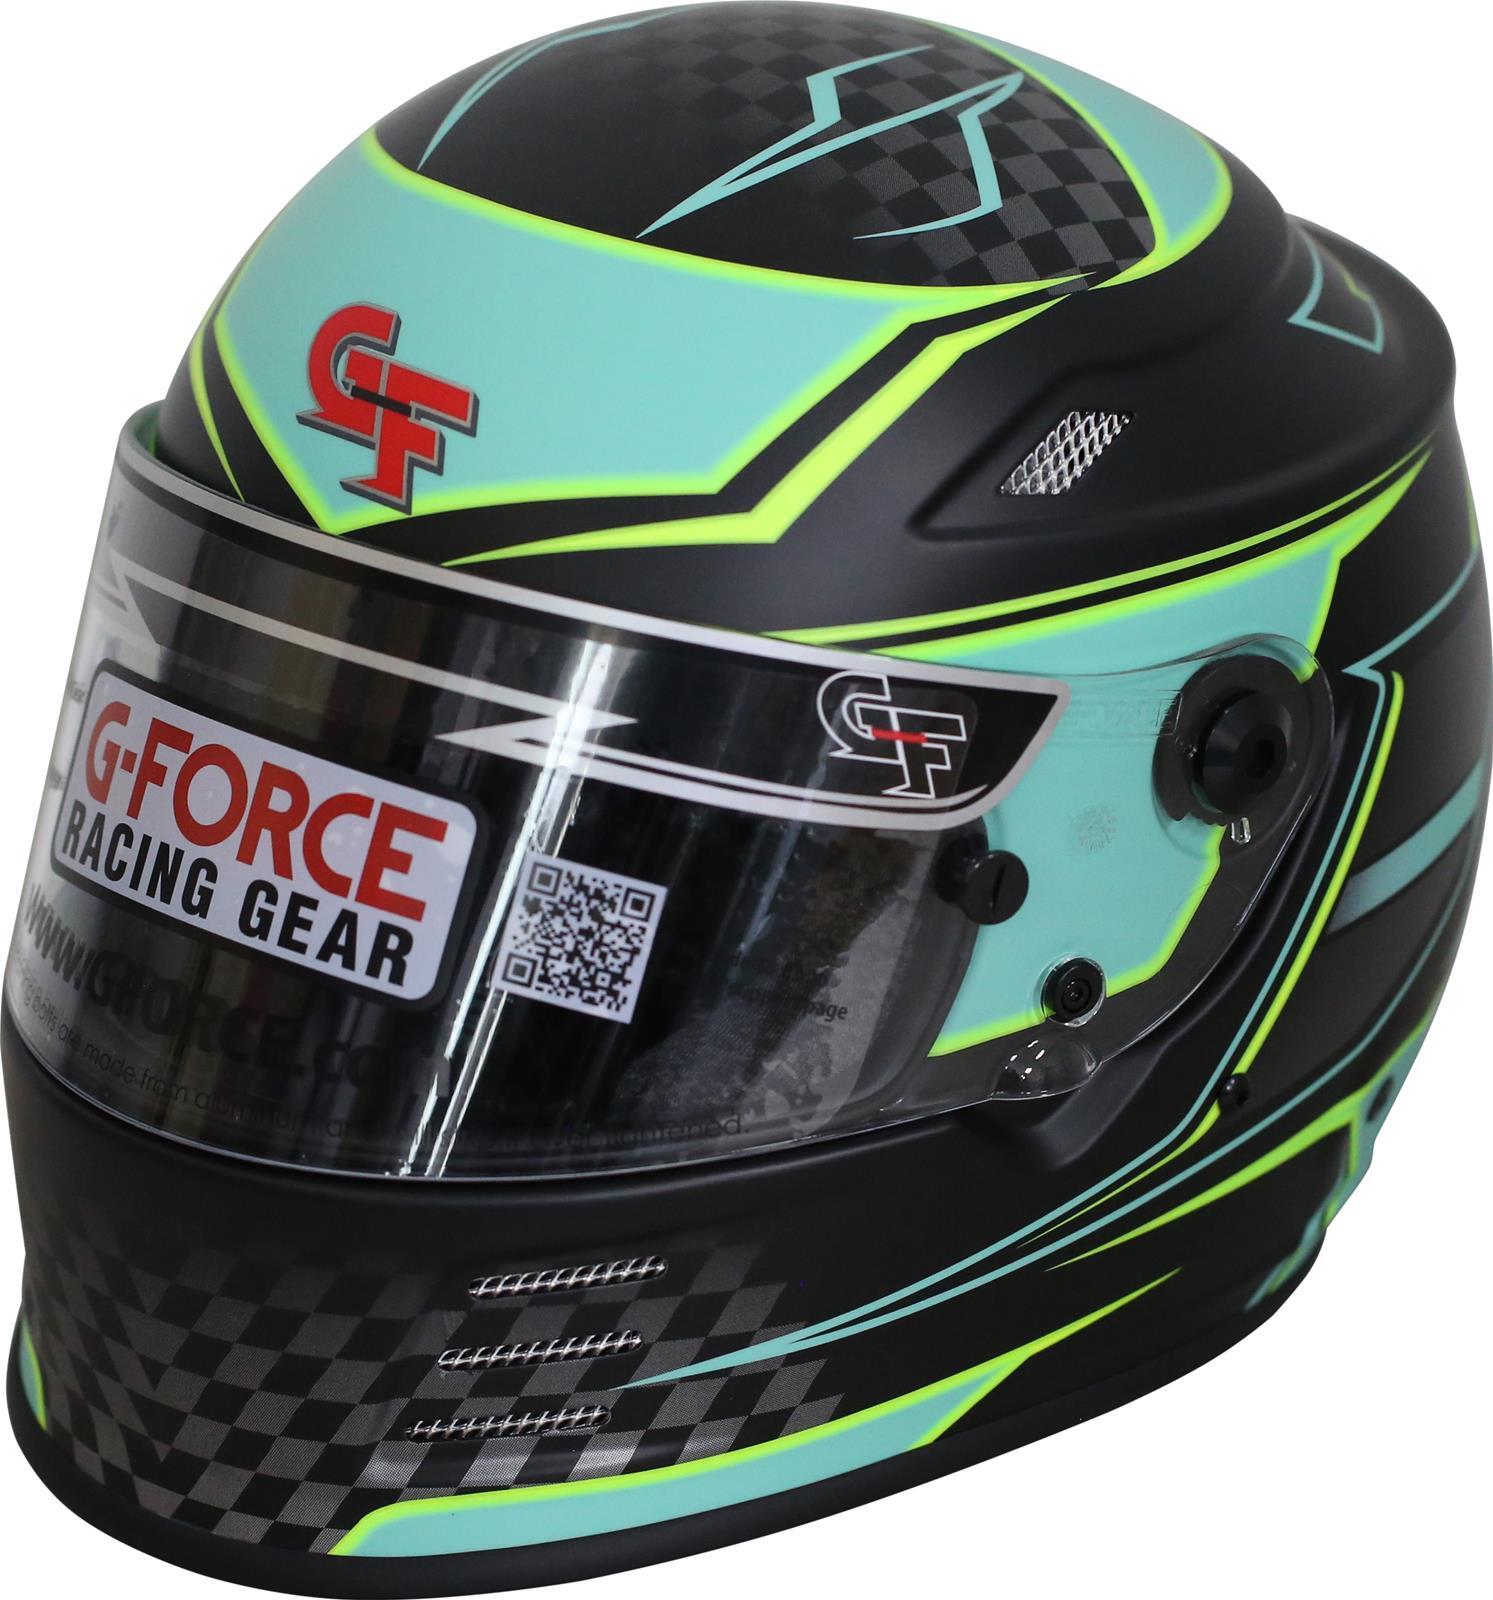 G-Force Racing Gear 13005XLGTL Helmet, Revo Graphics, Full Face, Snell SA2020, Head and Neck Support Ready, Black / Teal, X-Large, Each